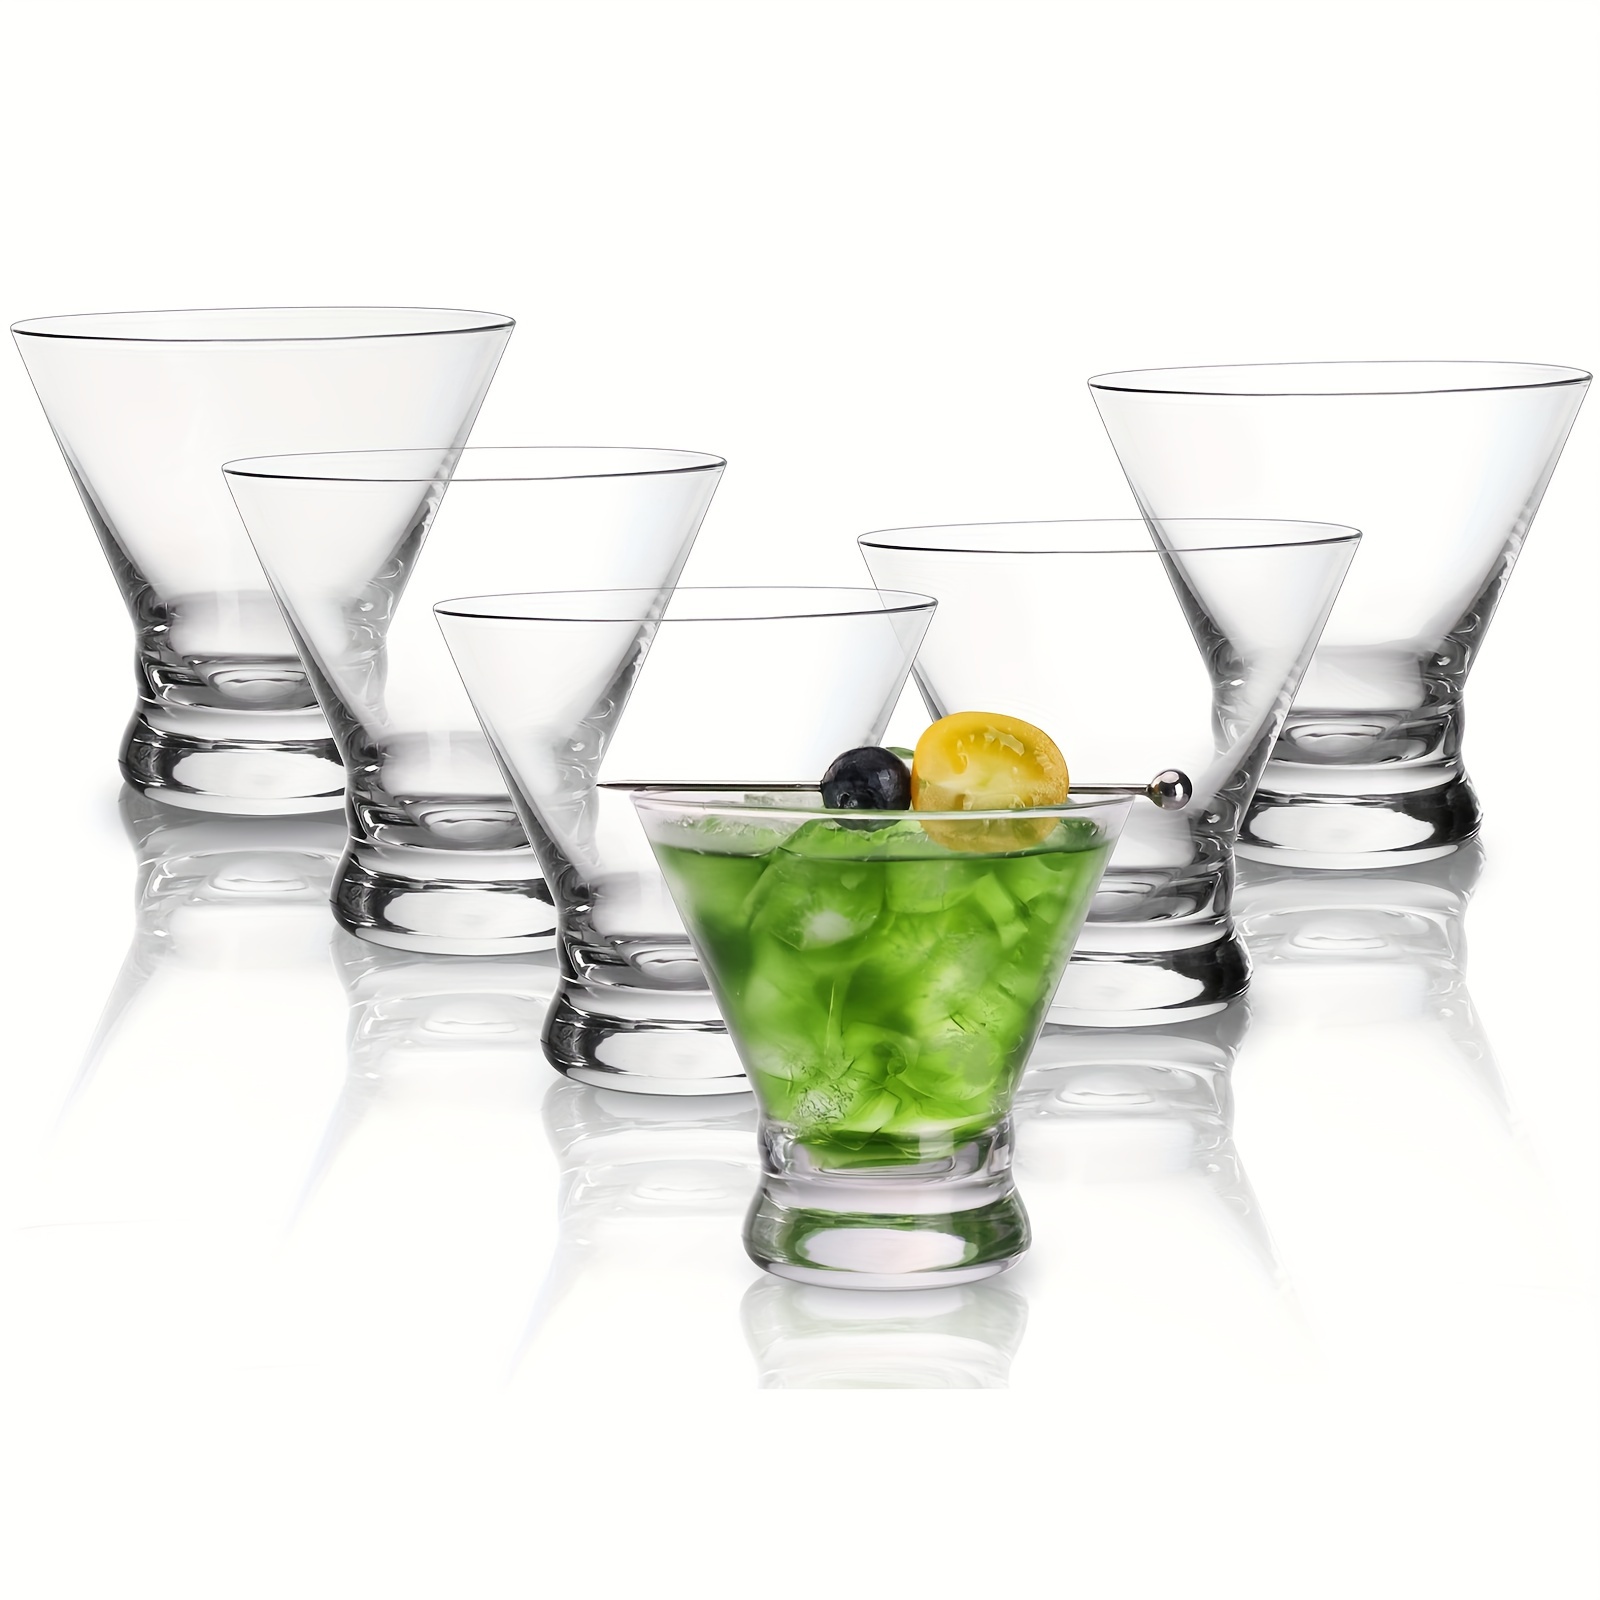 KEMORELA 12oz Drinking Glasses Art Deco Cocktail Glasses Set  of 4 Glass Cups, Arch Design Glassware, Trendy Ripple Glass, Beverages Ice  Coffee Cup, Ideal for Whiskey, Beer, Juice, Water -Small